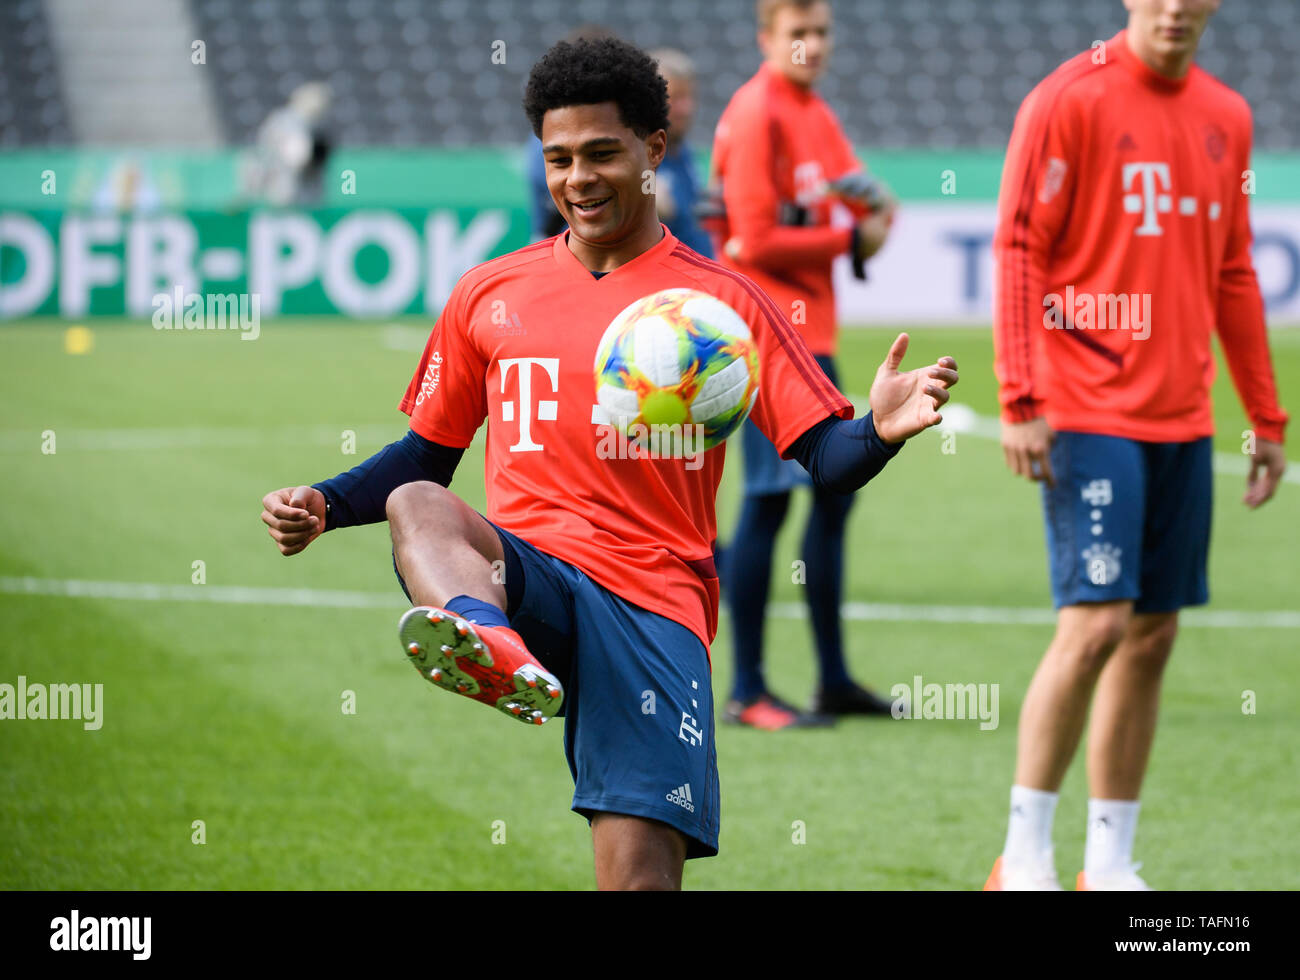 Berlin, Germany. 24th May, 2019. Bayern Munich's Serge Gnabry attends a training session for the upcoming German Cup final match between RB Leipzig and FC Bayern Munich in Berlin, capital of Germany, on May 24, 2019. Credit: Kevin Voigt/Xinhua/Alamy Live News Stock Photo